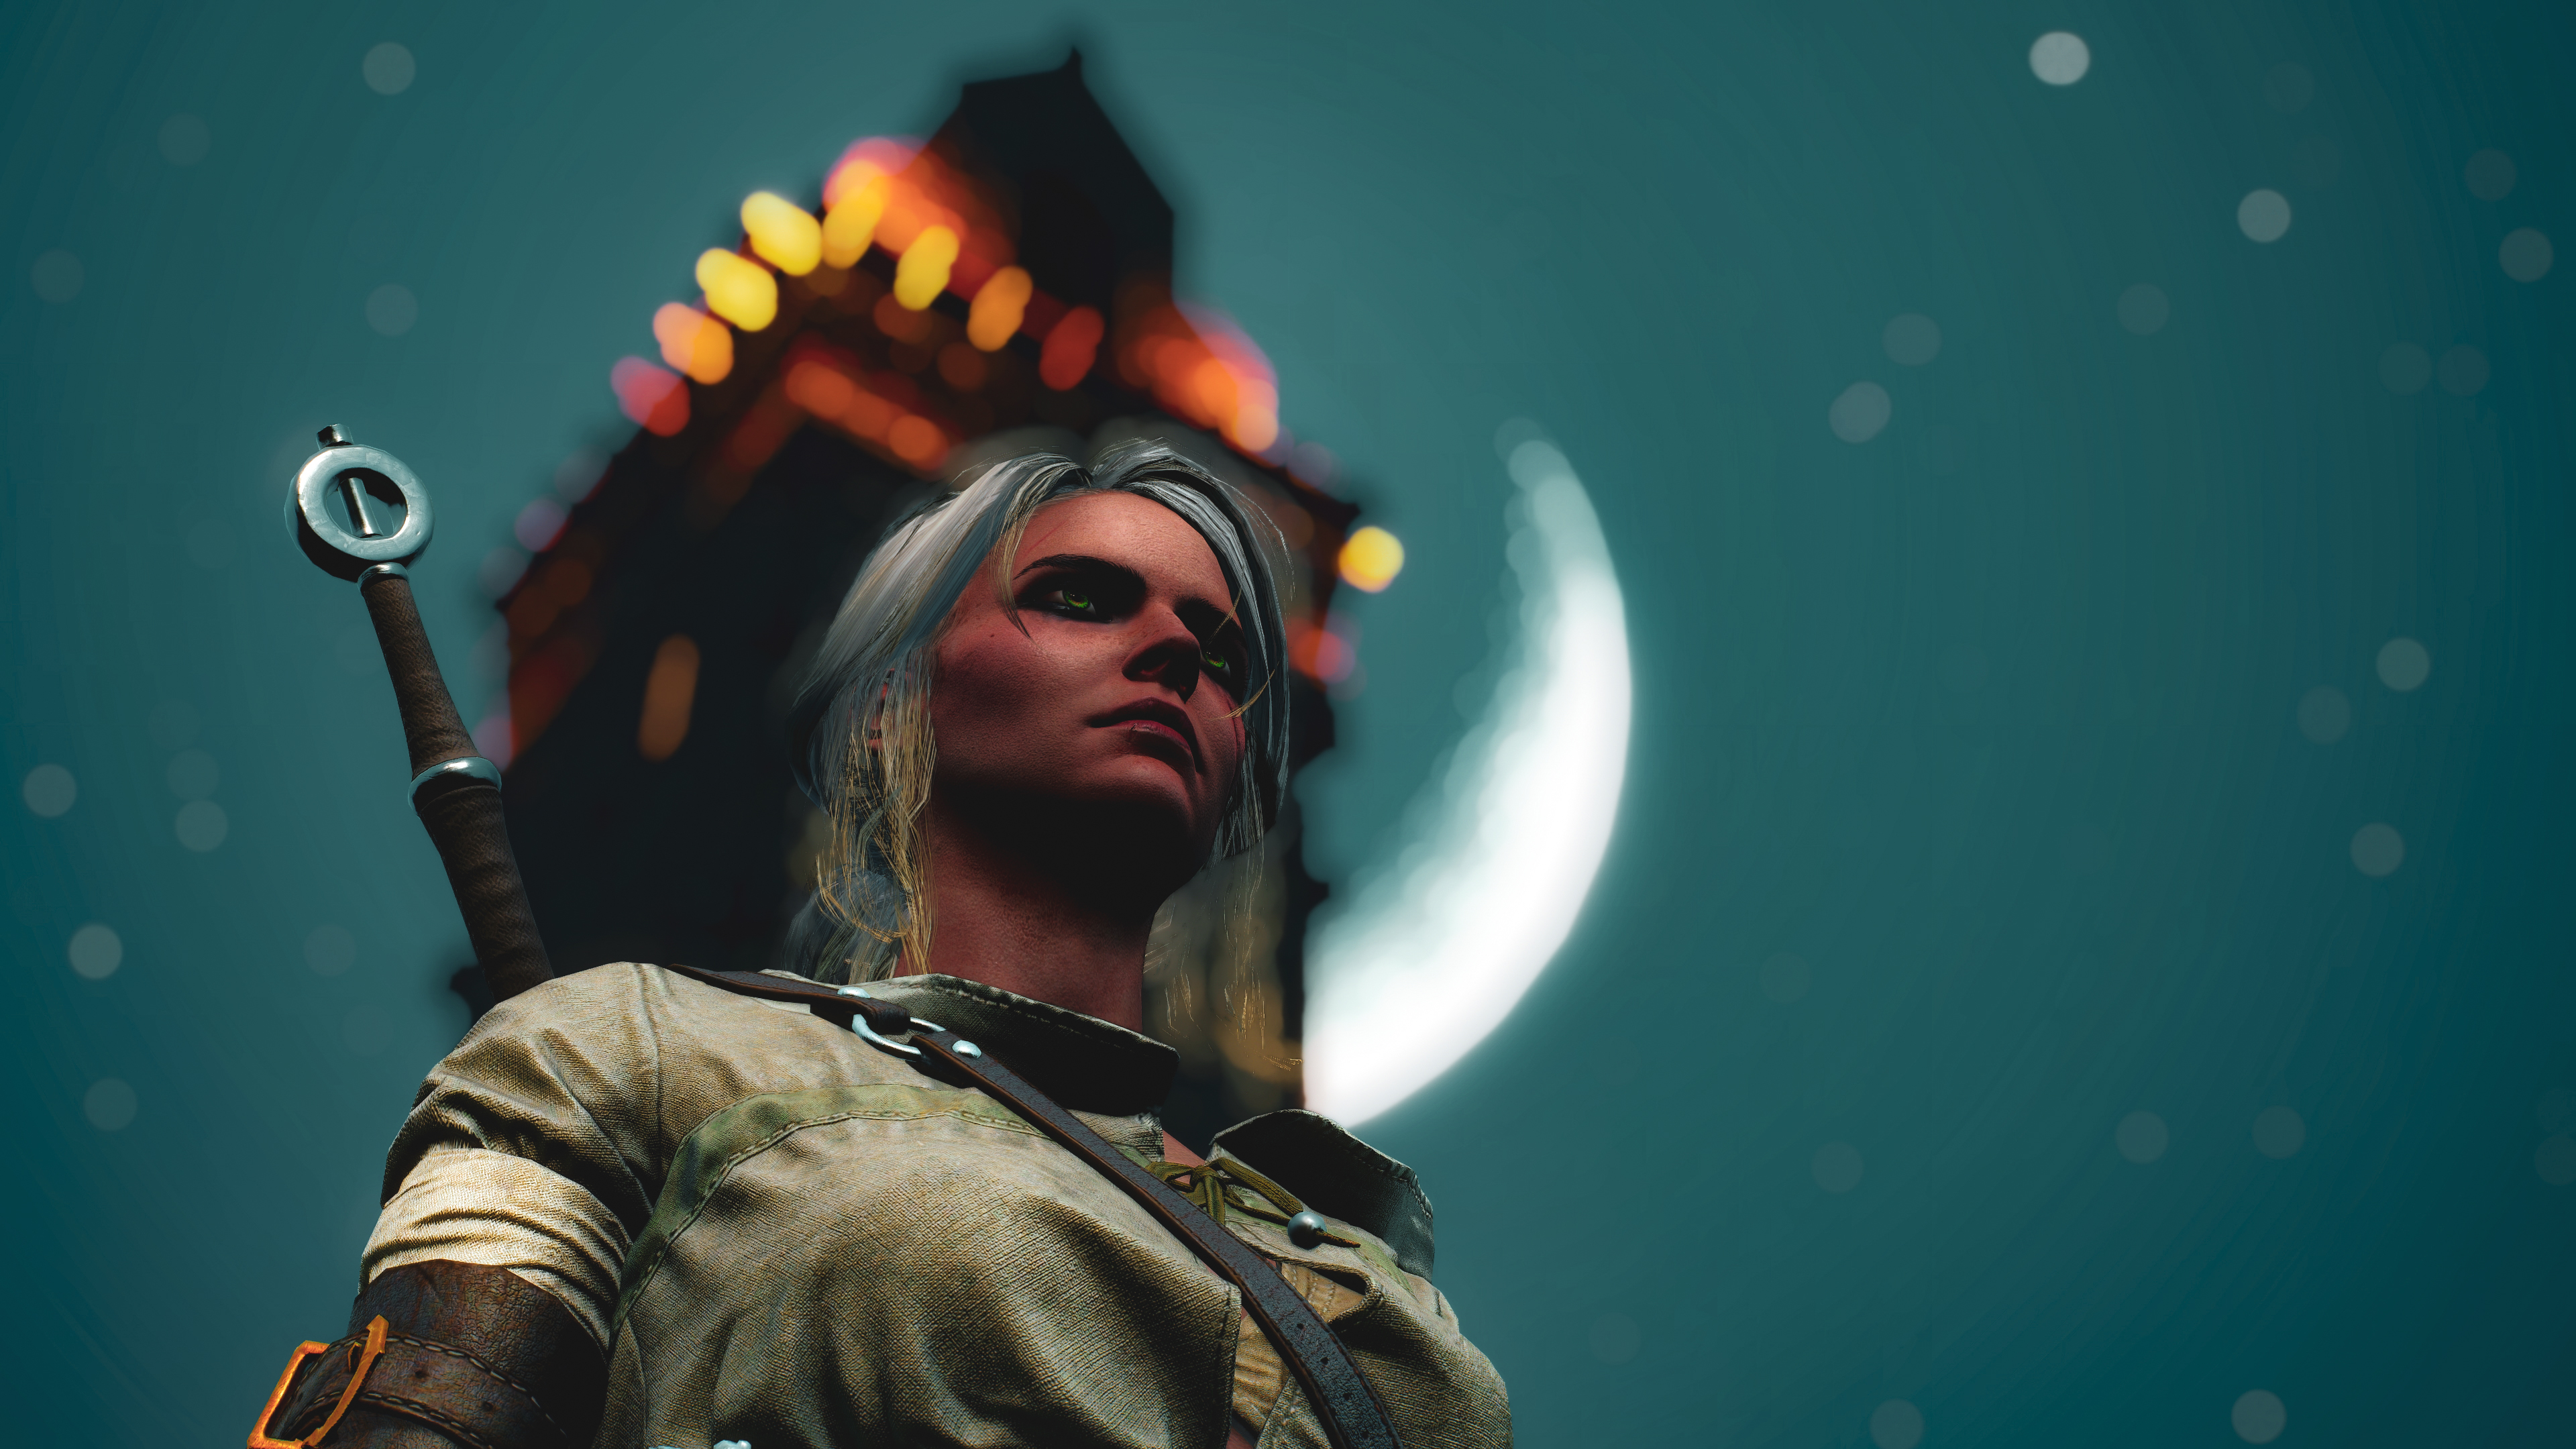 General 3840x2160 The Witcher The Witcher 3: Wild Hunt Cirilla Fiona Elen Riannon screen shot women video games video game characters CD Projekt RED